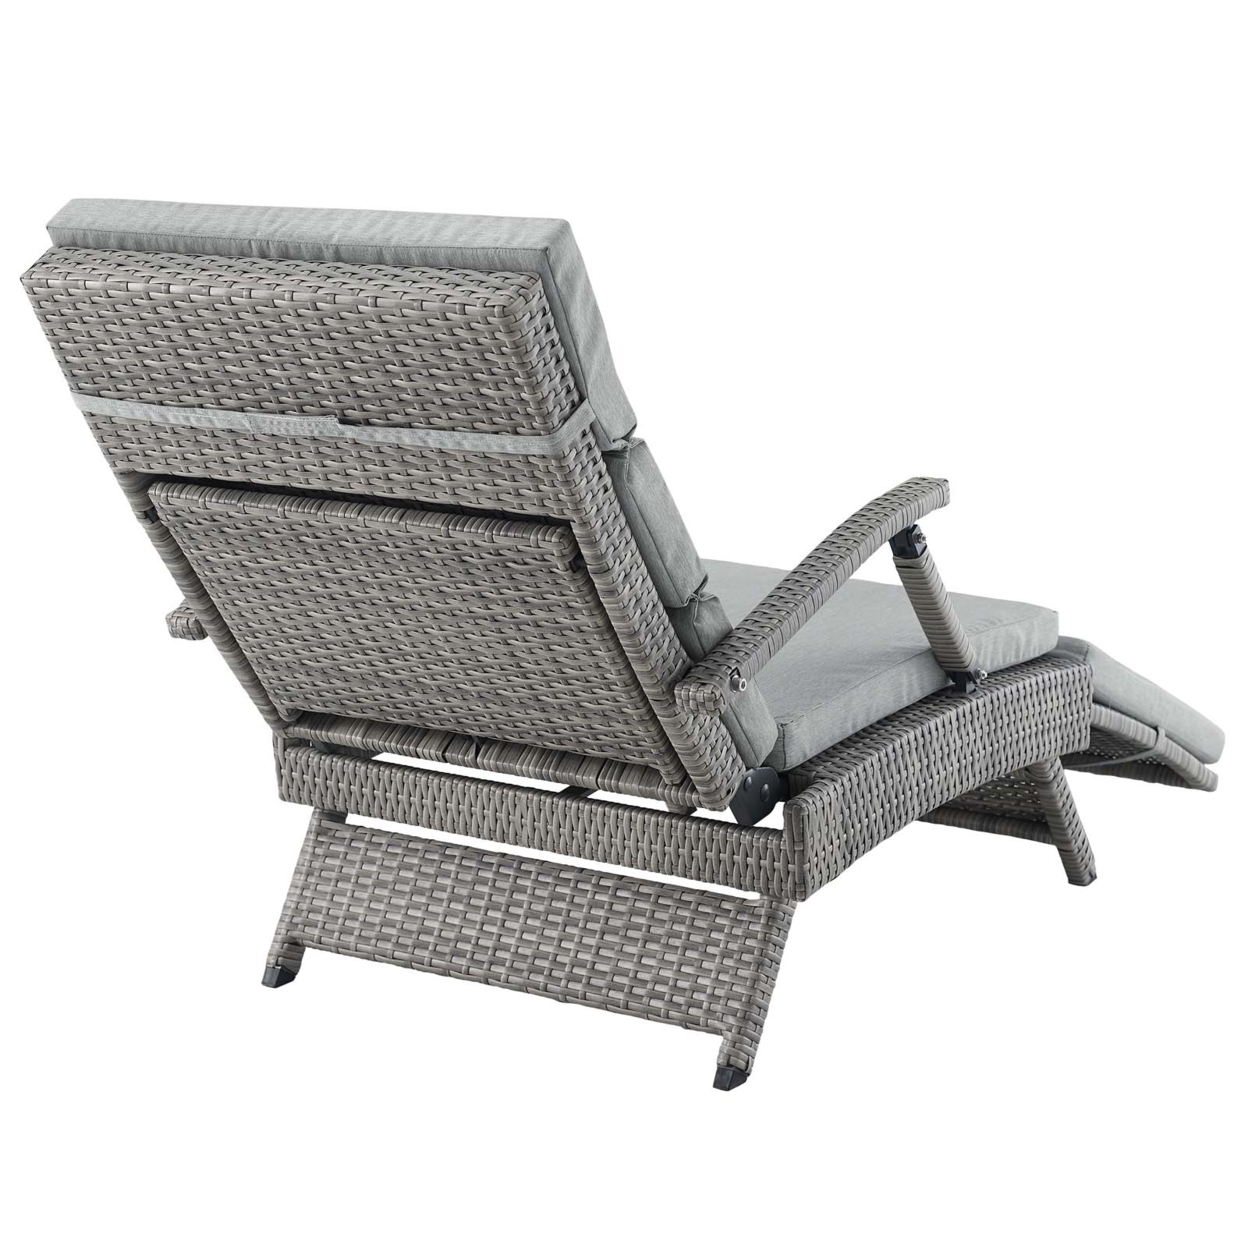 Envisage Chaise Outdoor Patio Wicker Rattan Lounge Chair,Light Gray Gray